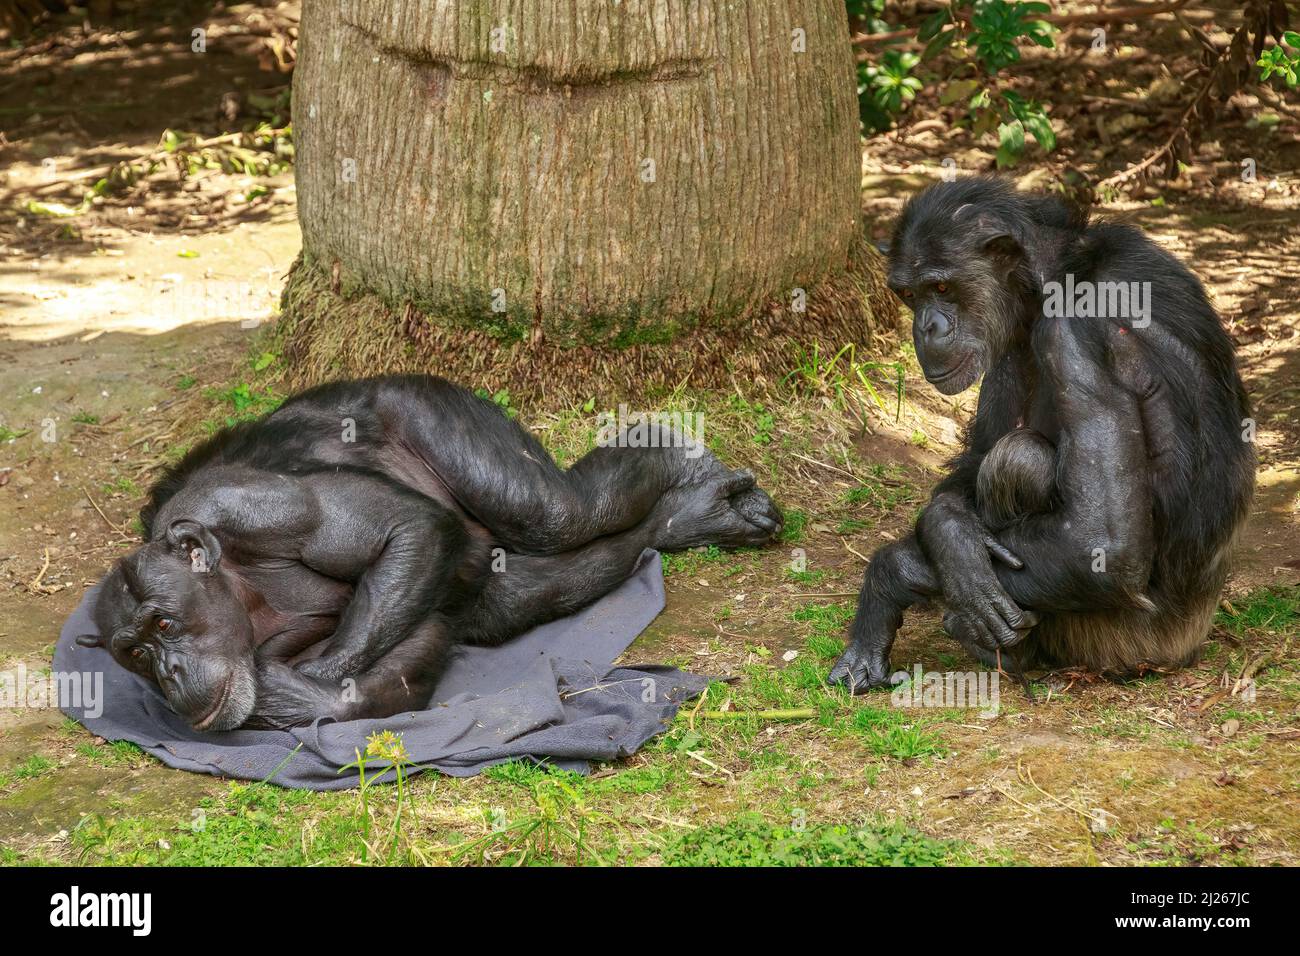 Chimpanzees at a zoo. An older male rests on a blanket with a female sitting next to him Stock Photo